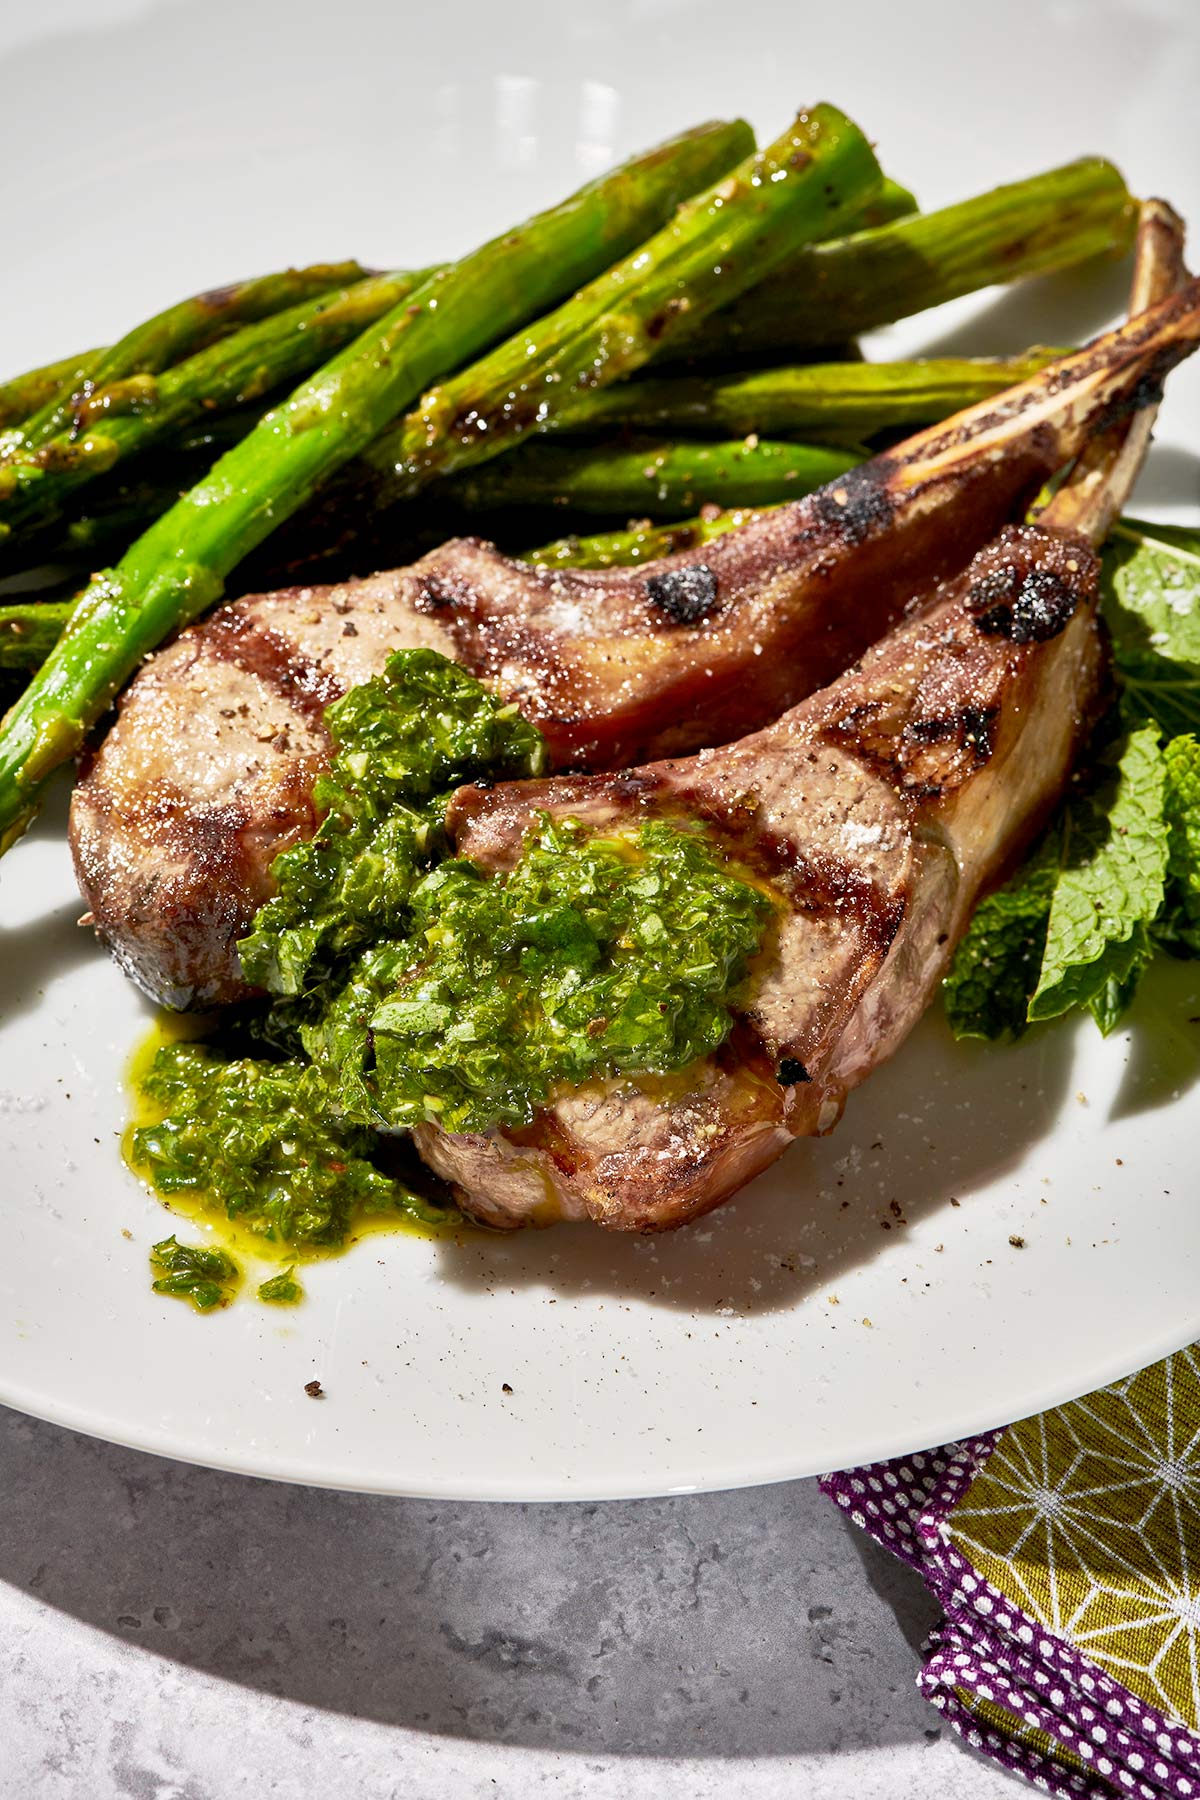 Picnic table with plate of Grilled Rib Lamb Chops covered in pesto alongside asparagus.